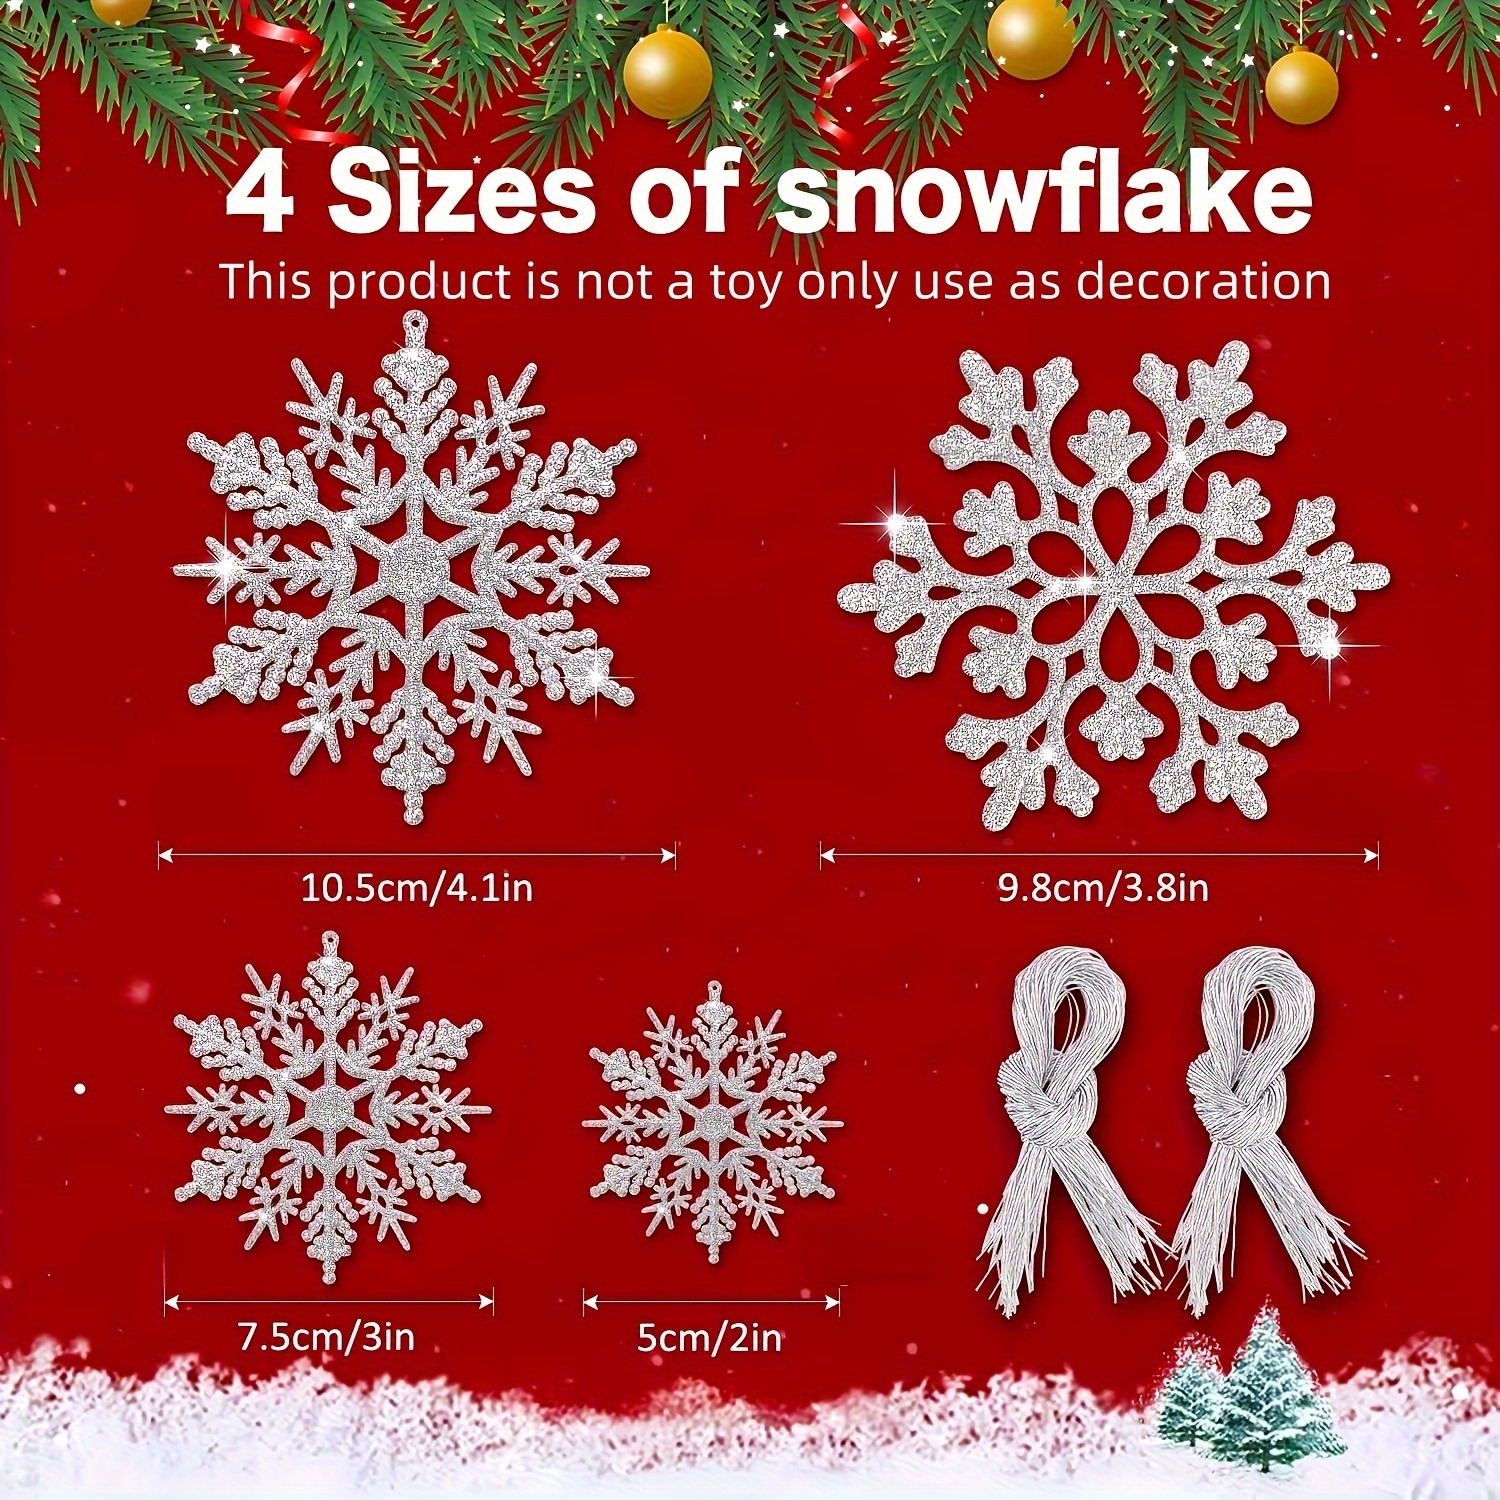 12 Pieces Plastic Snowflake Ornaments Christmas Glitter Snowflakes Hanging Crafts for Christmas Tree Wedding Embellishing Party Decorations White